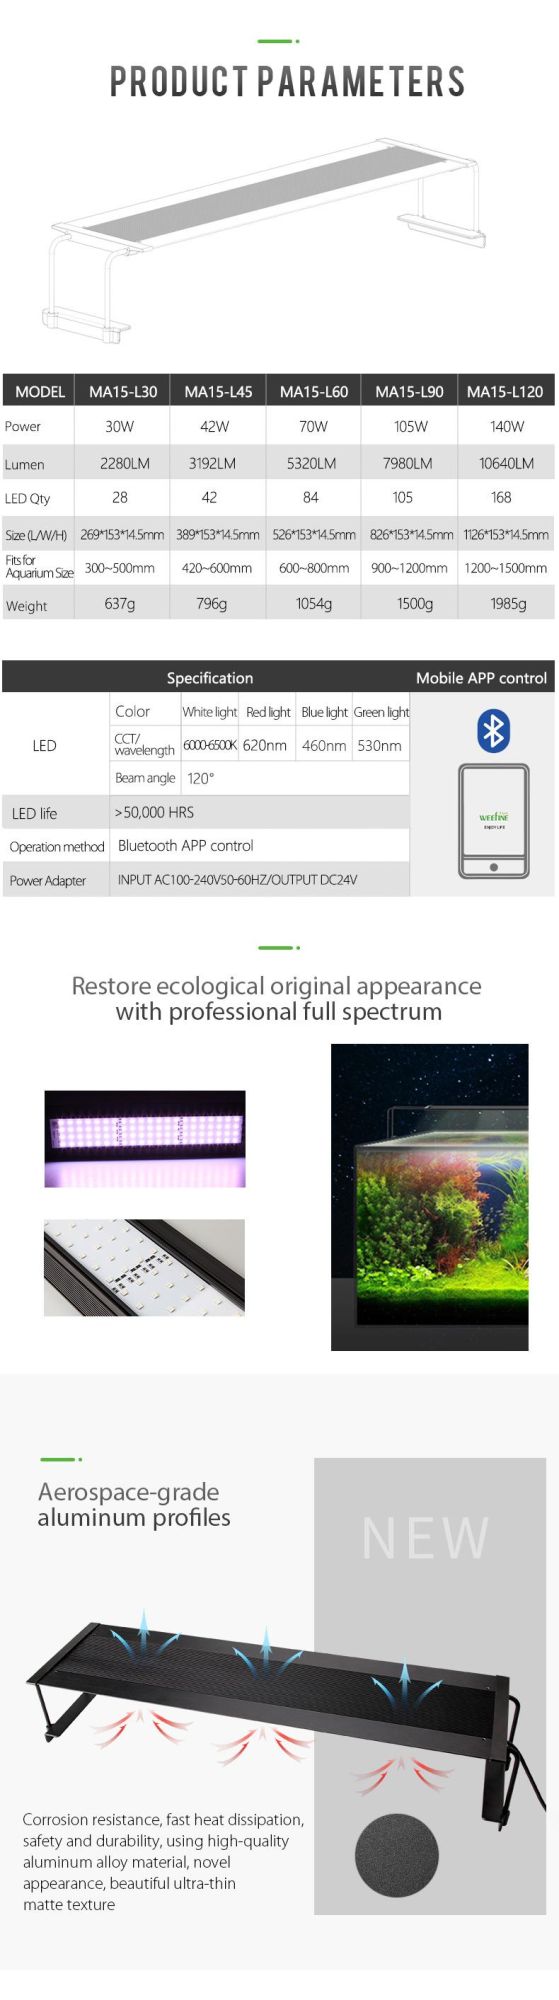 140W Programmable LED Aquarium Light for Coral Reef with Sunset and Sunrise Mode (MA15)